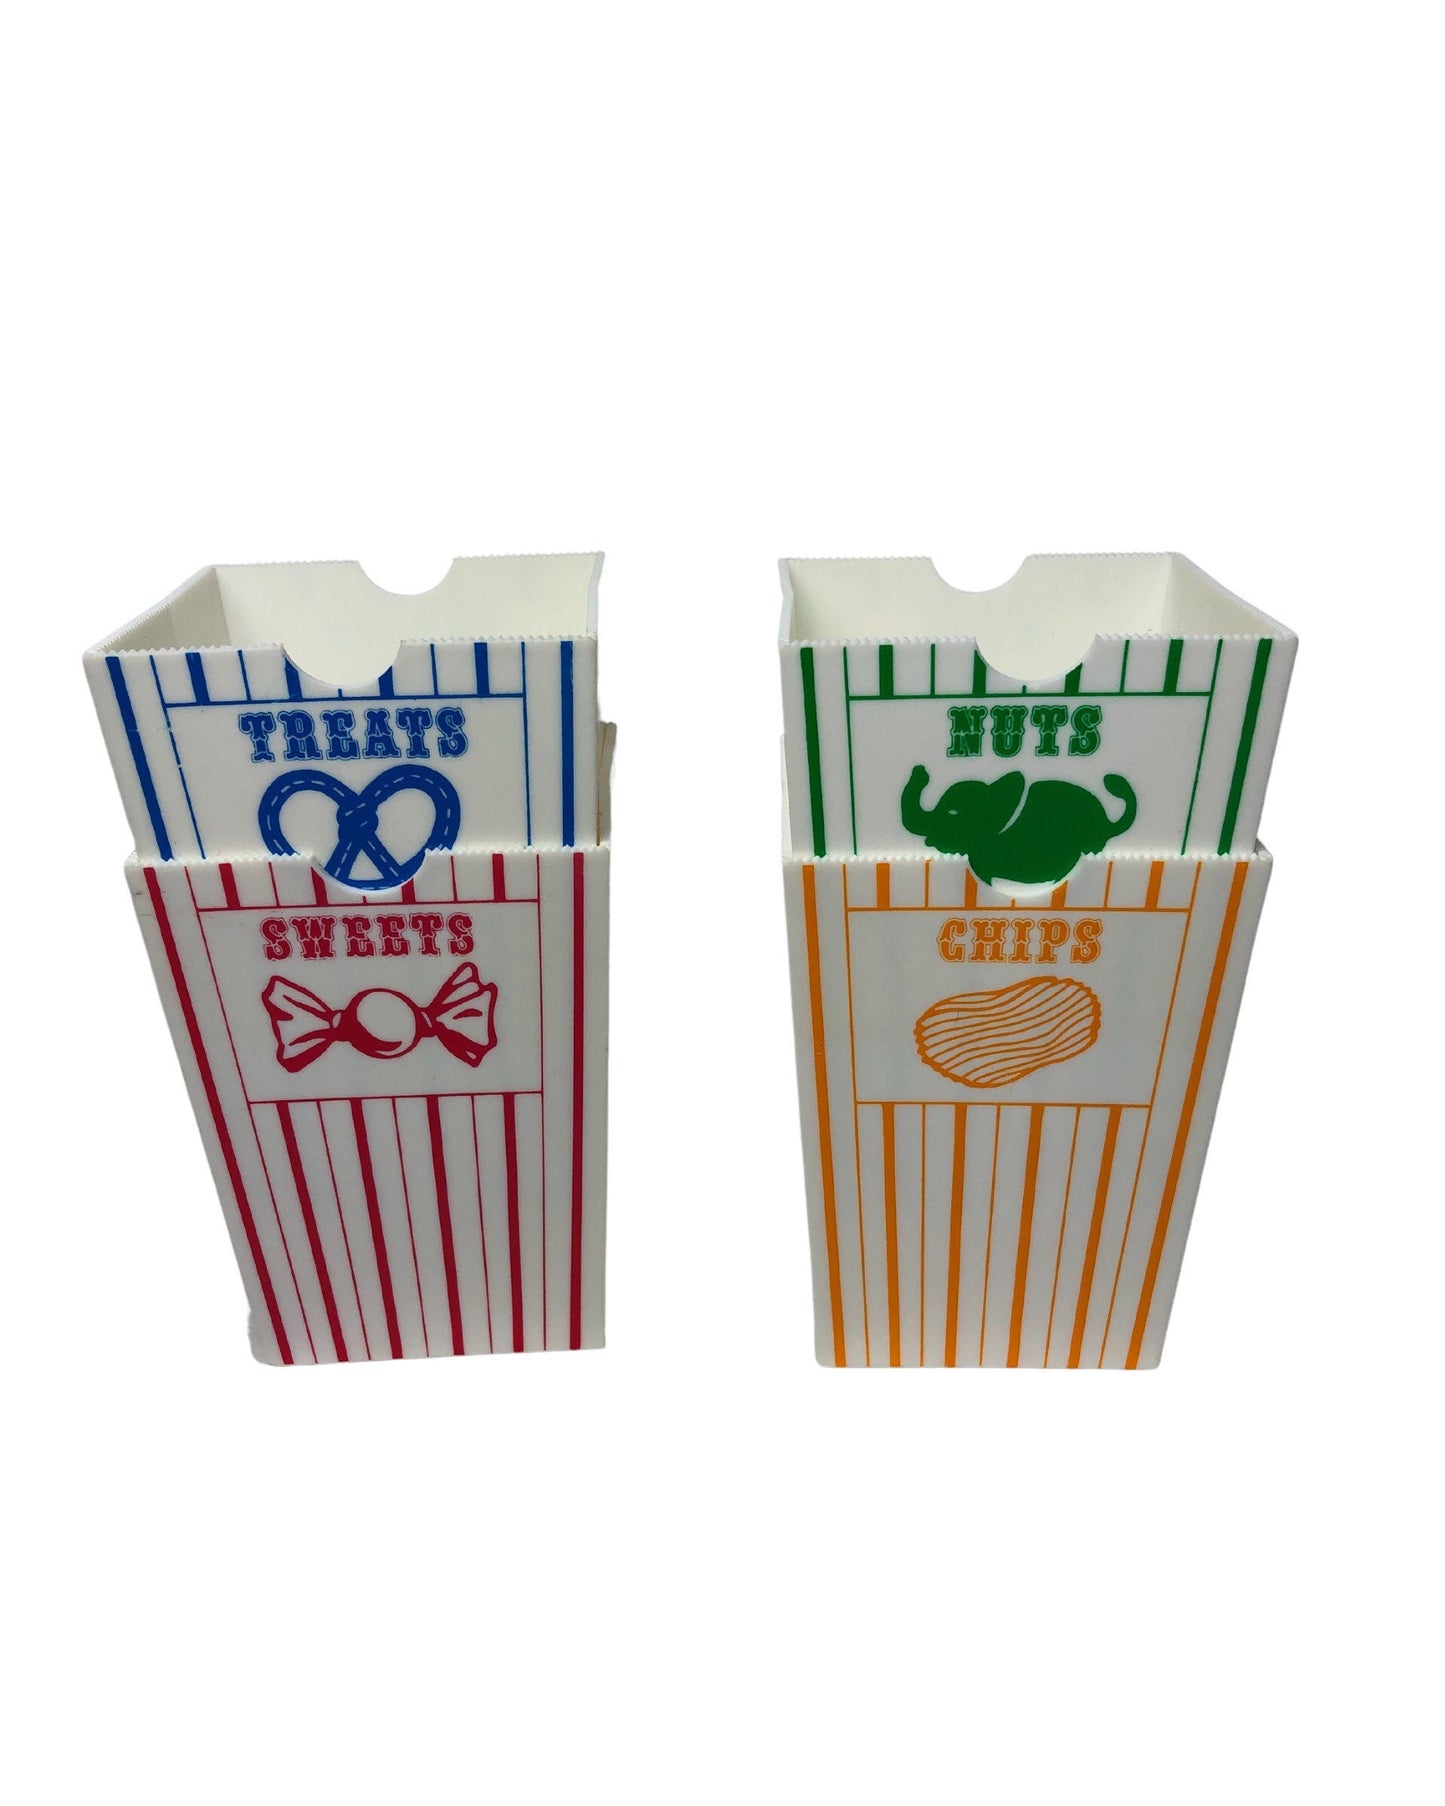 1960’s Set of 4 CIRCUS Nuts, Treats, Sweets, Chips Plastic Popcorn Snack Containers